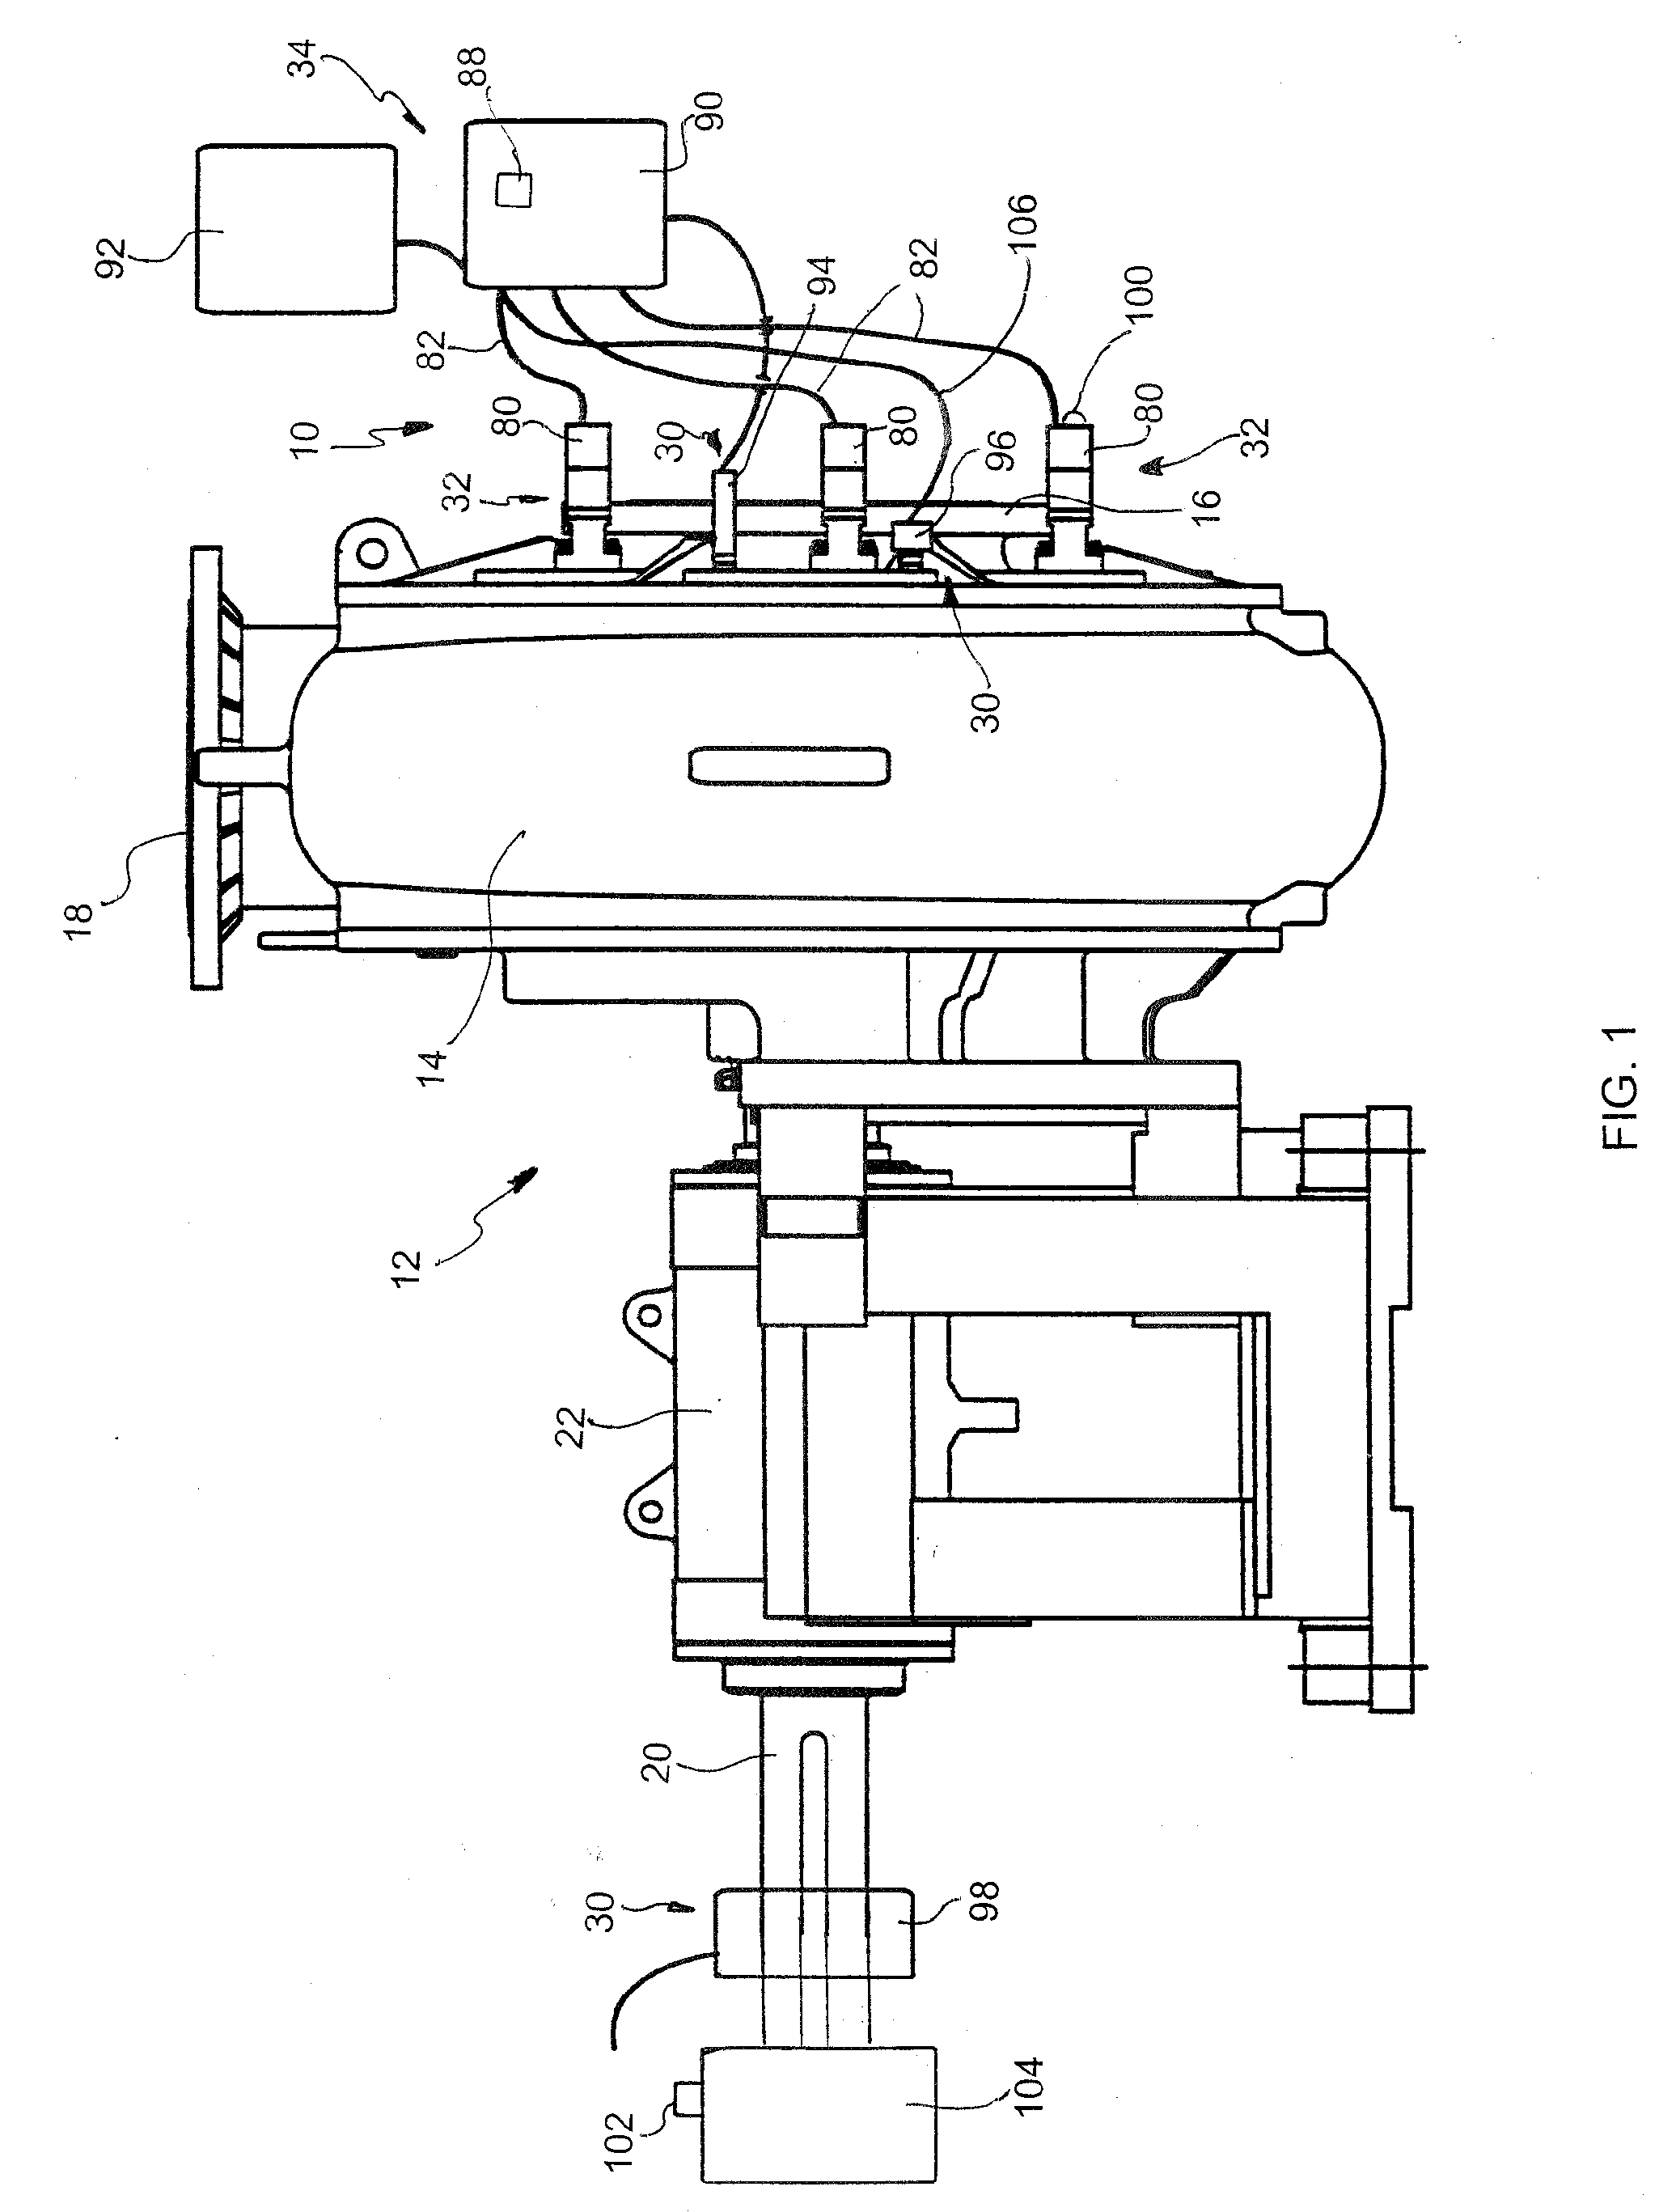 Self-monitoring system for evaluating and controlling adjustment requirements of leakage restricting devices in rotodynamic pumps